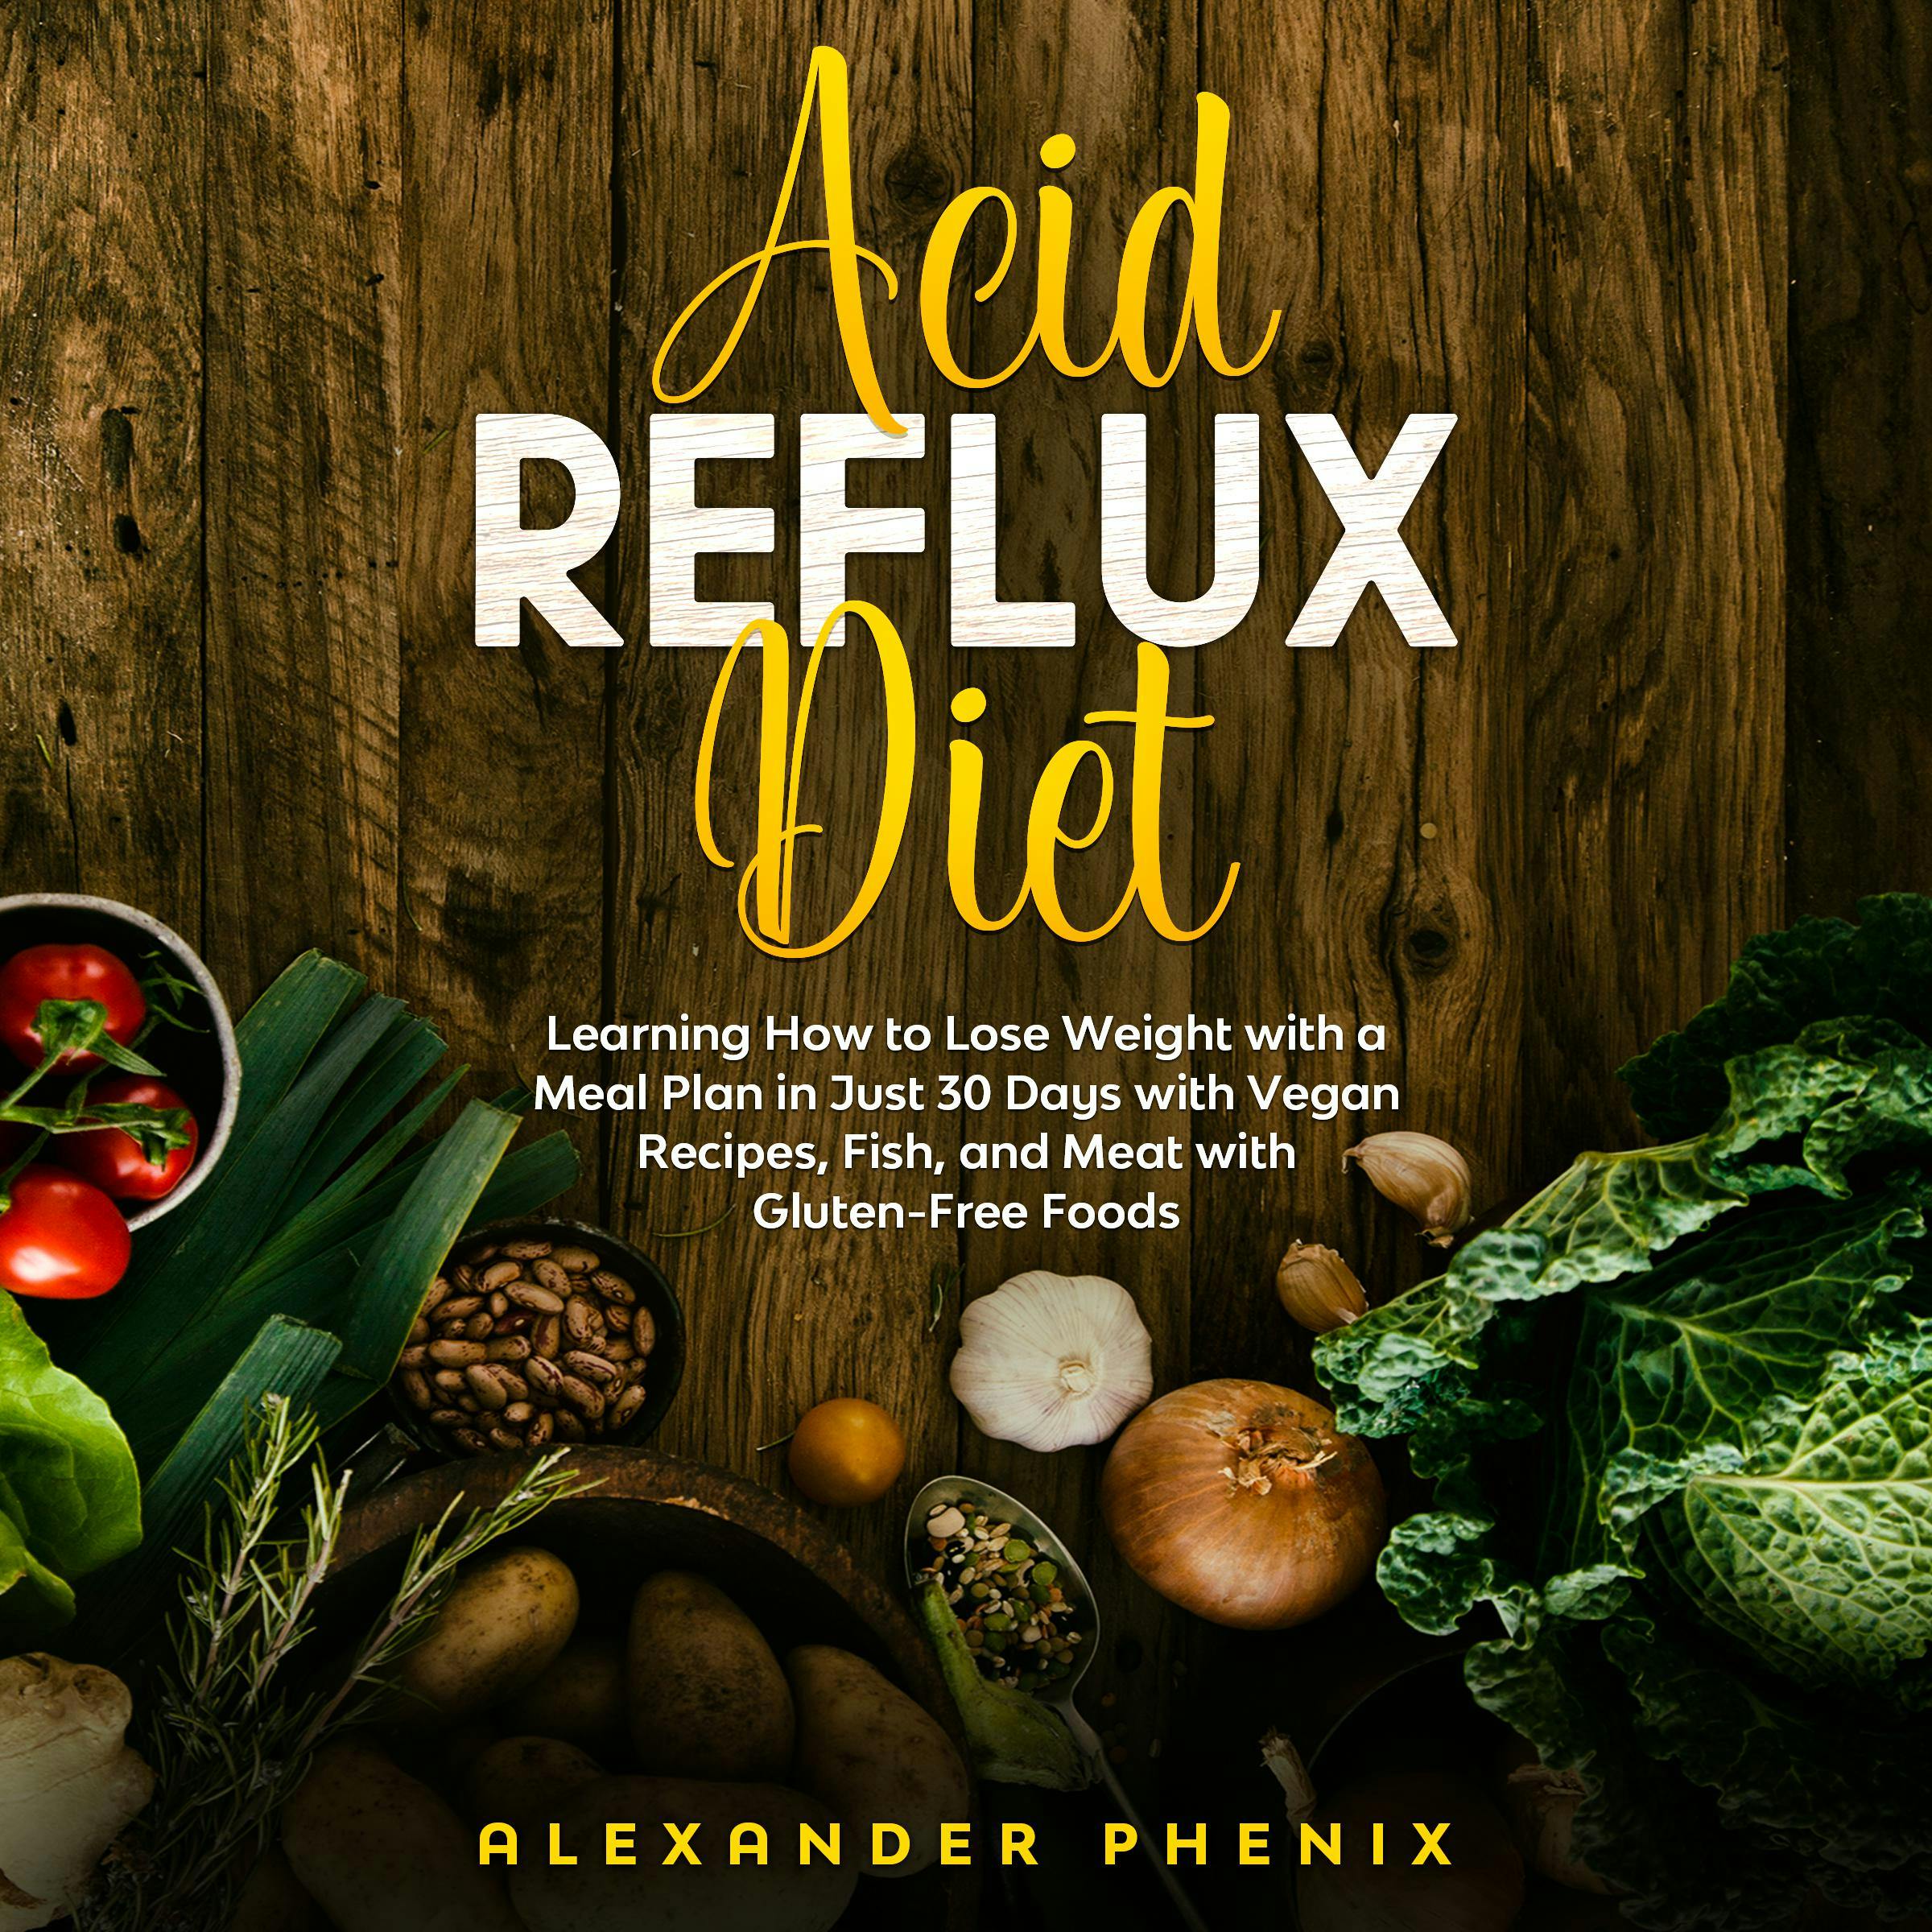 Acid Reflux Diet: Learning How to Lose Weight with a Meal Plan in Just 30 Days with Vegan Recipes, Fish, and Meat with Gluten-Free Foods - Alexander Phenix